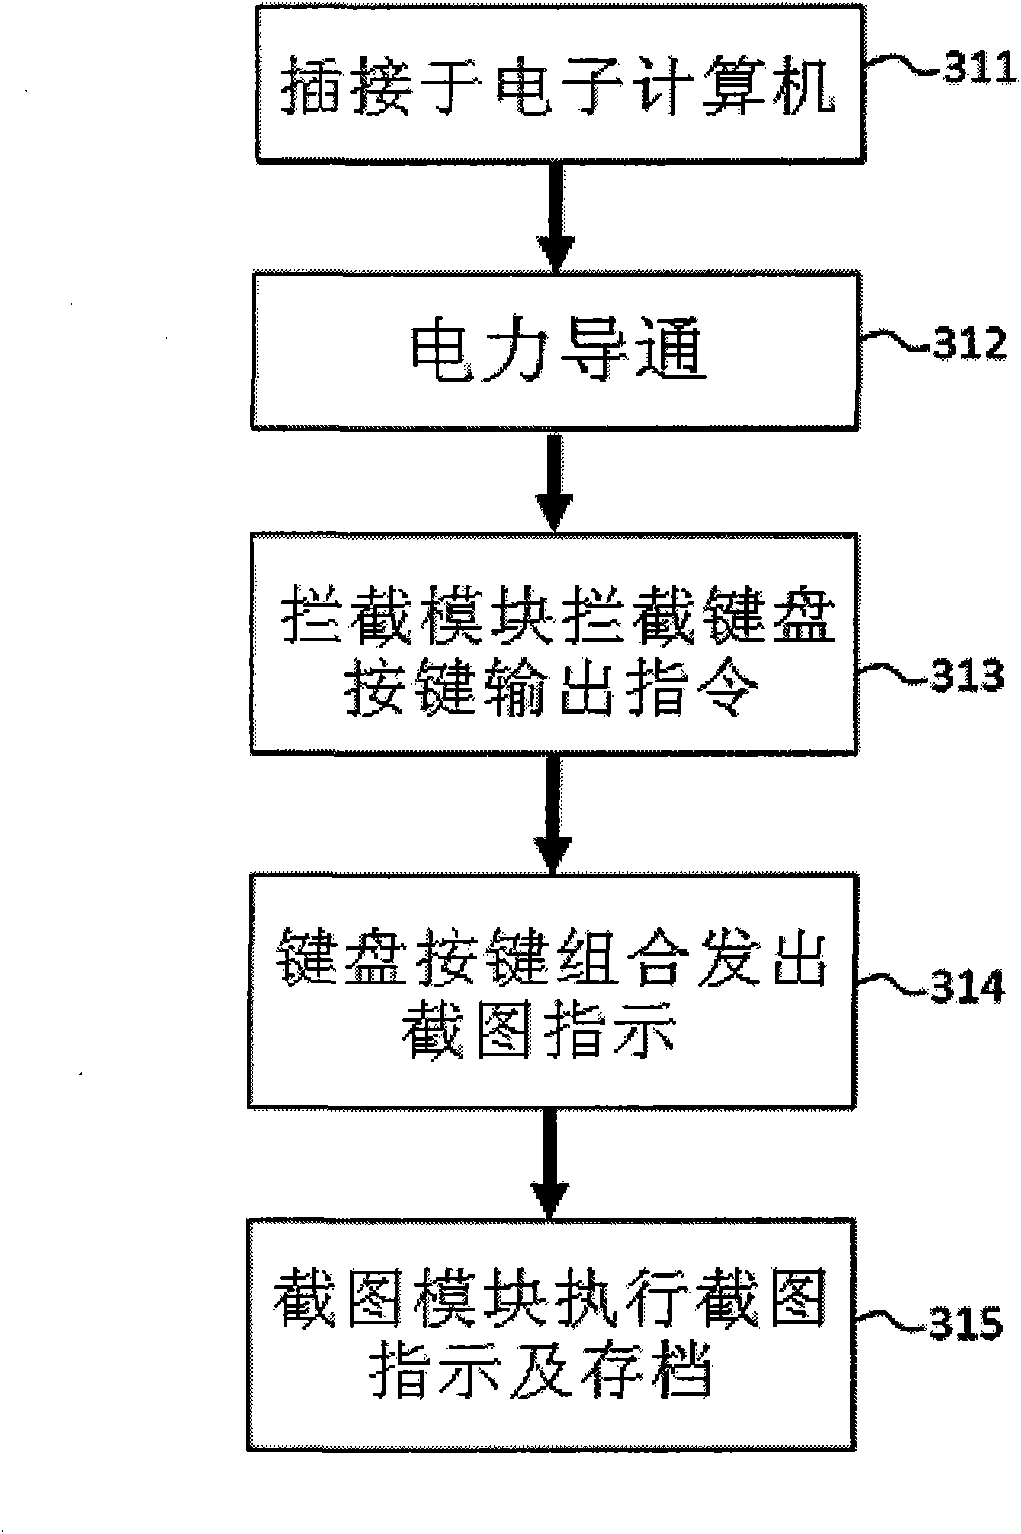 Portable storage device and method for operating the same